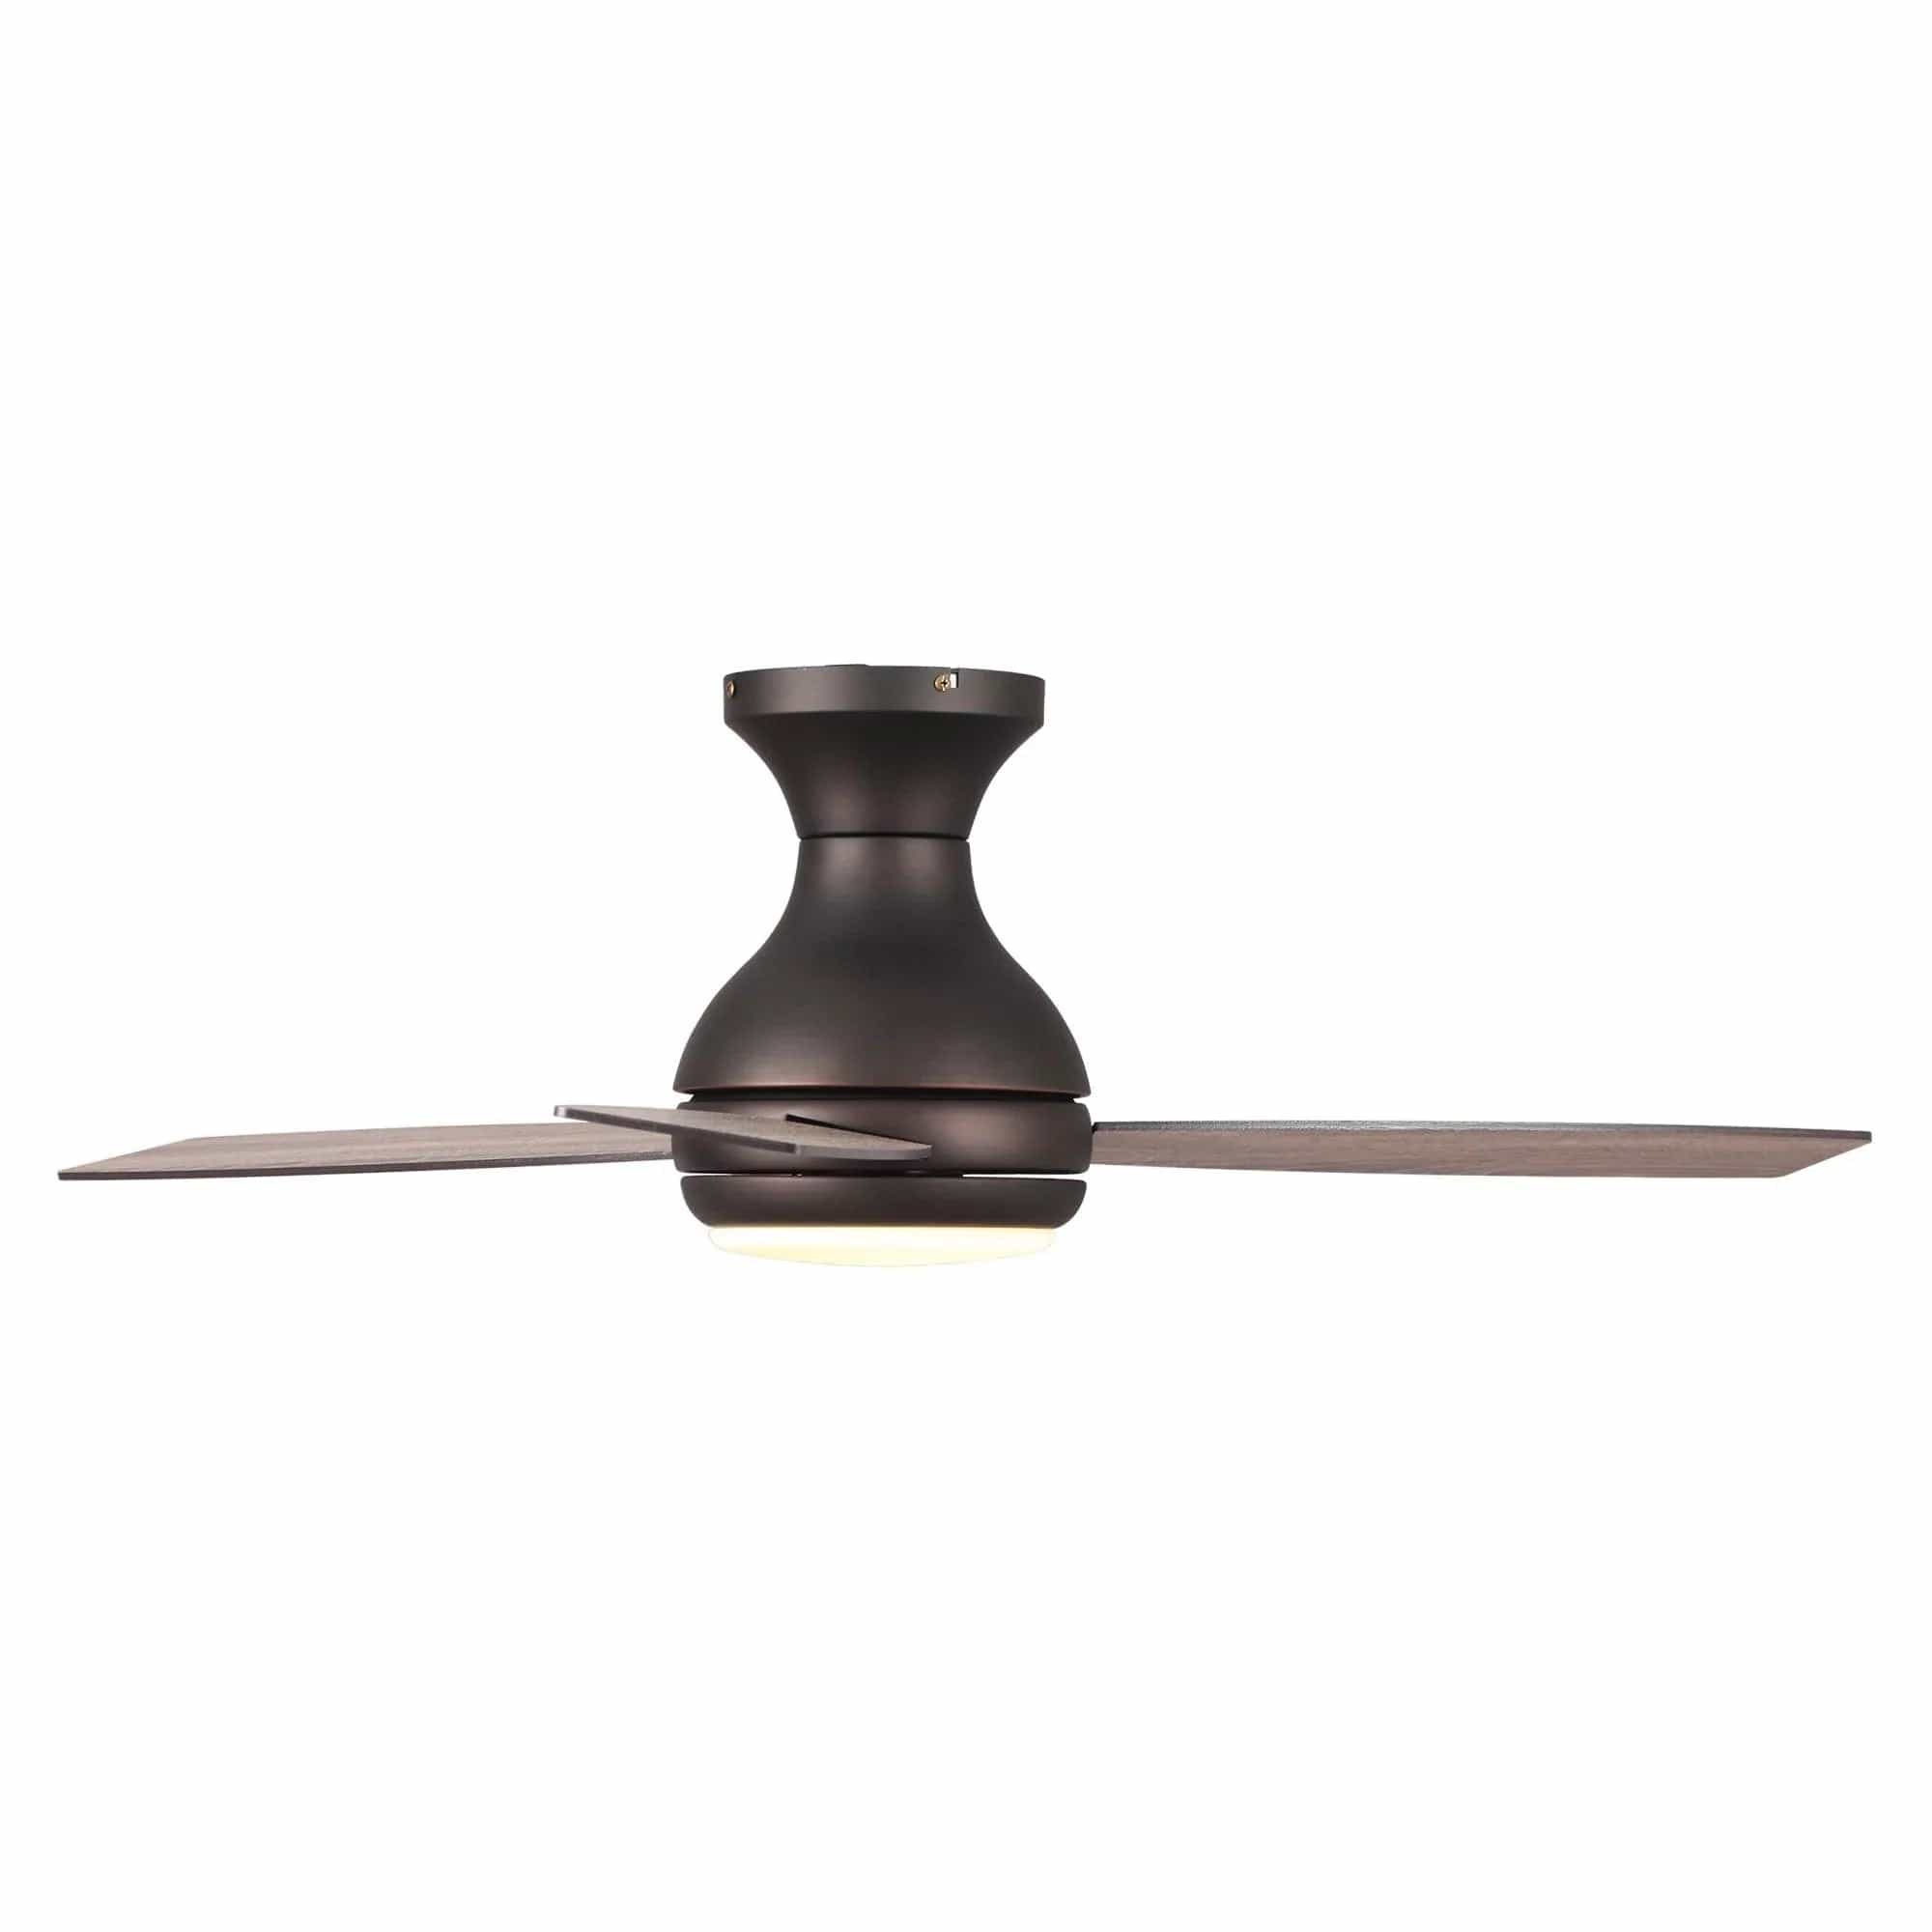 Parrot Uncle Parrot Uncle 48 In. Beckette Modern Ceiling Fan with Lighting and Remote Control Ceiling Fan F6297110V